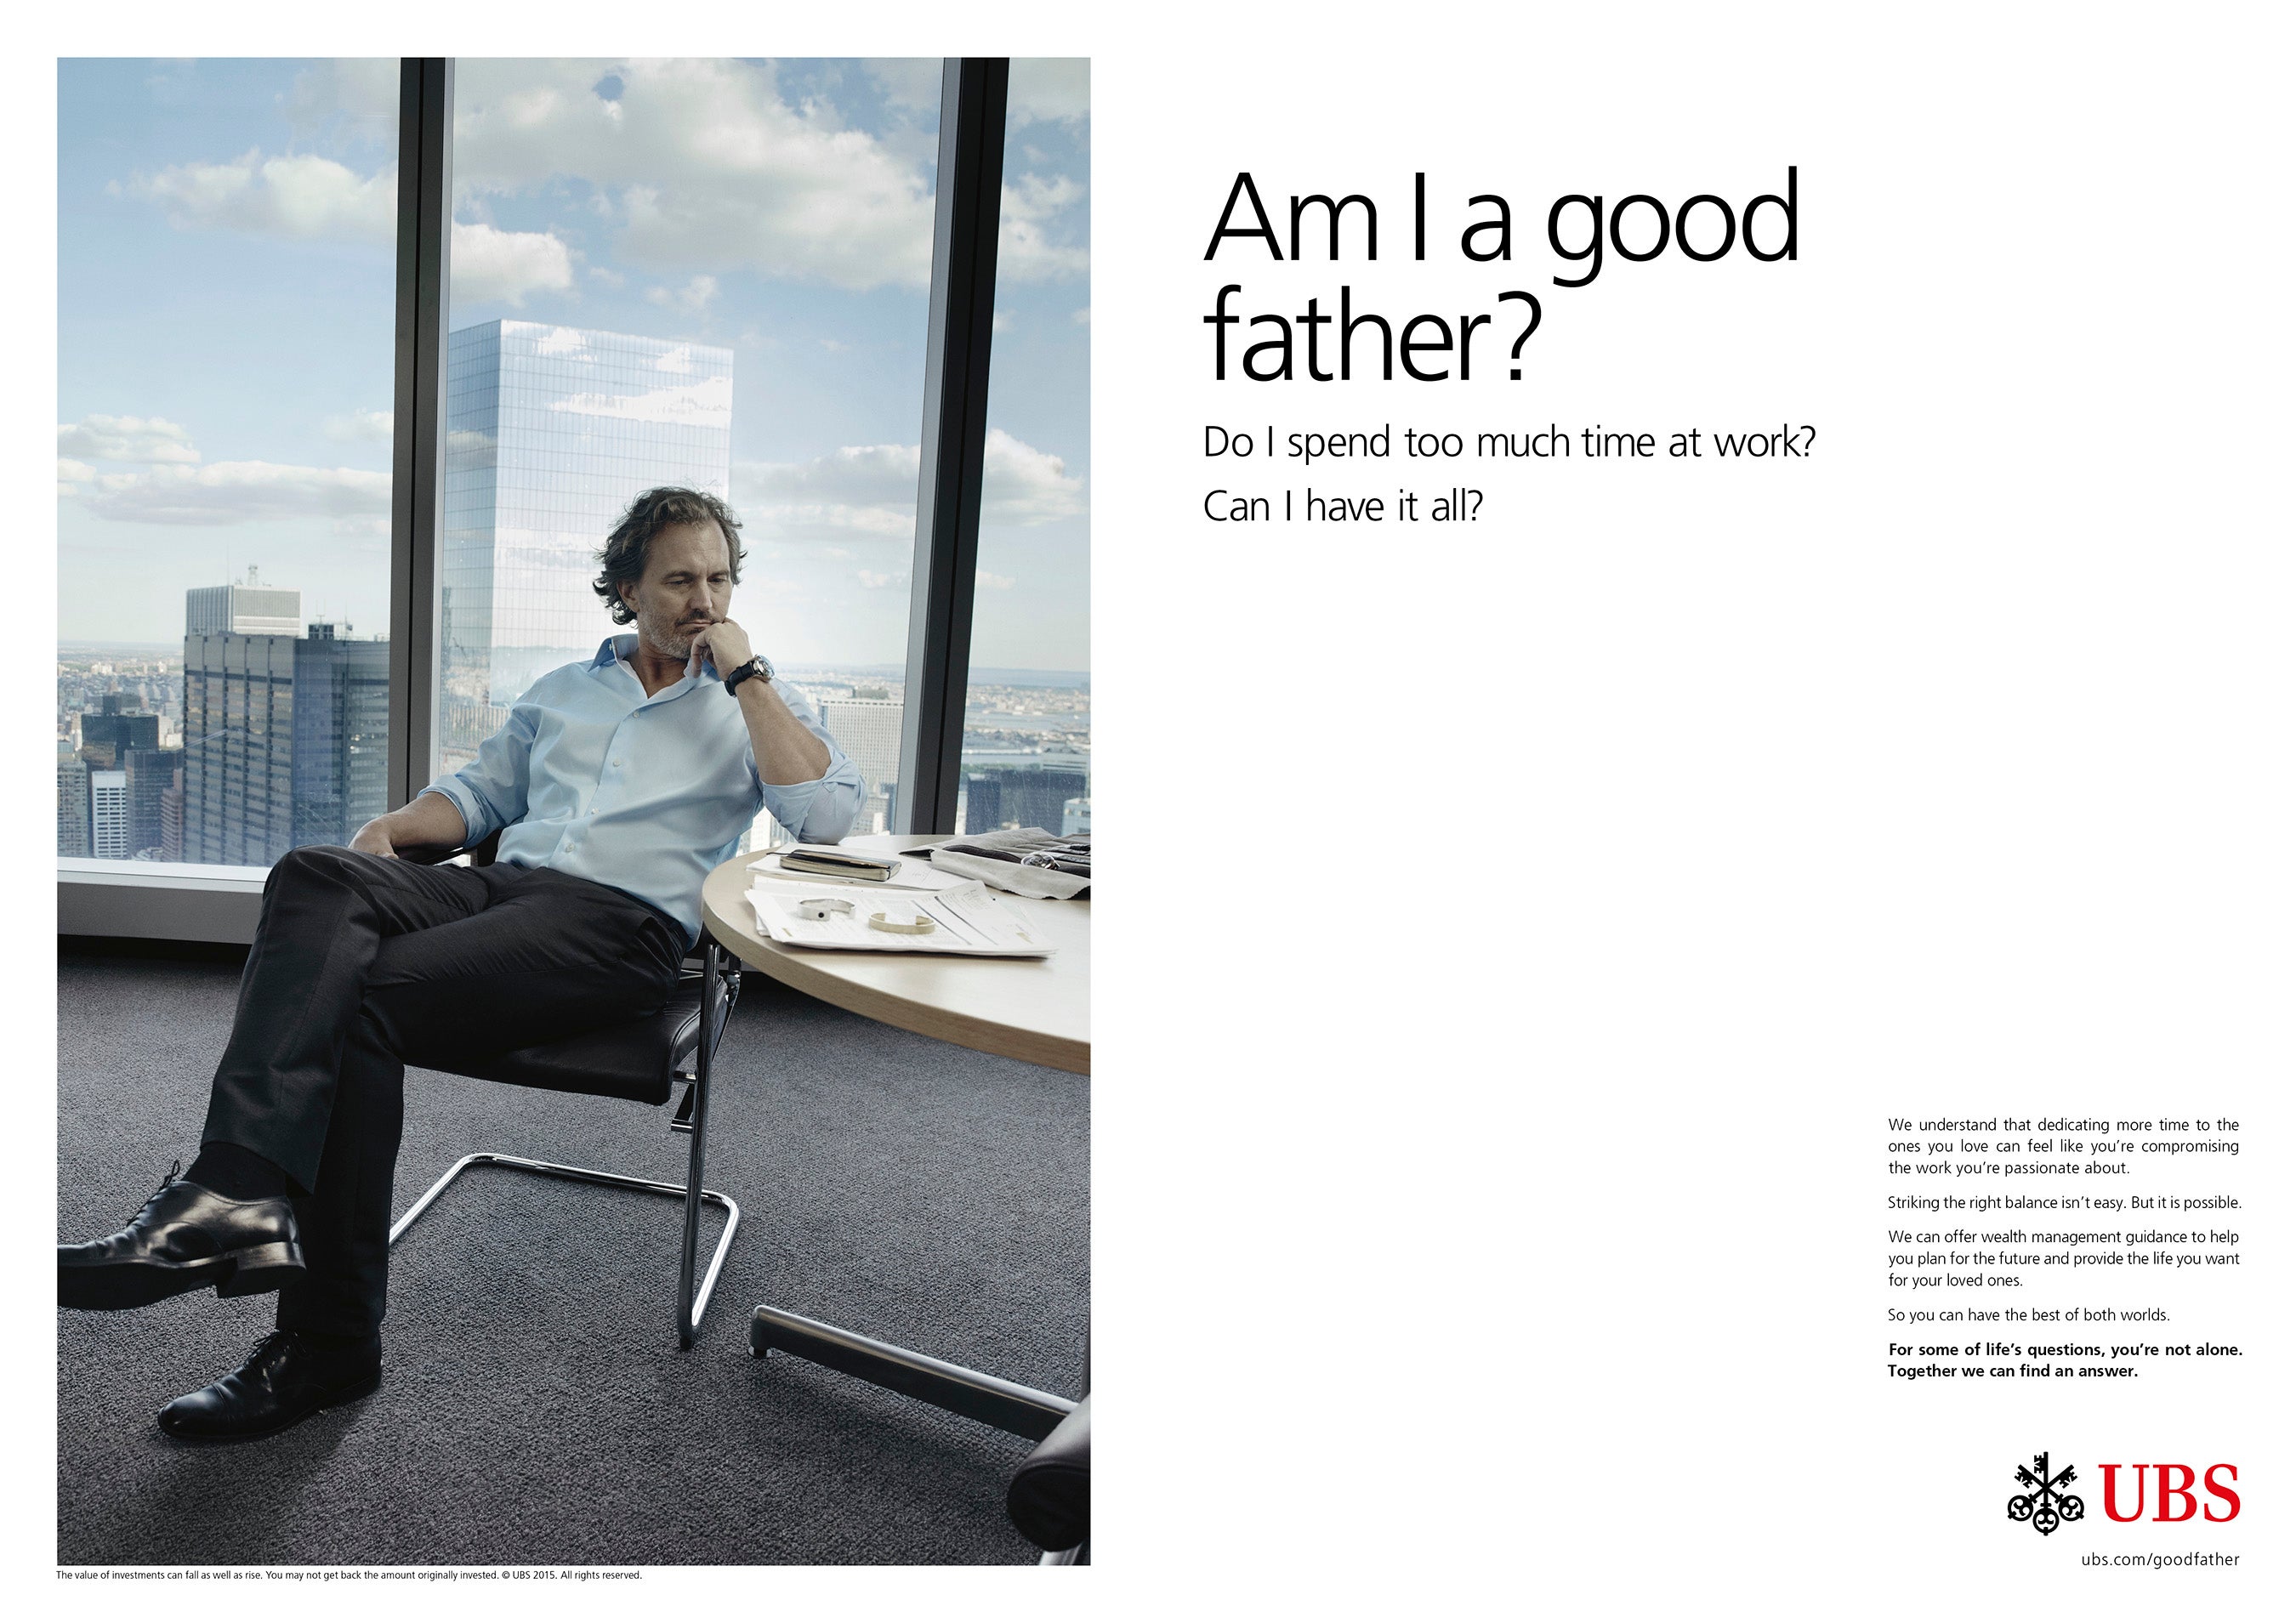 Campaign photography by Annie Leibovitz for the new UBS global brand campaign